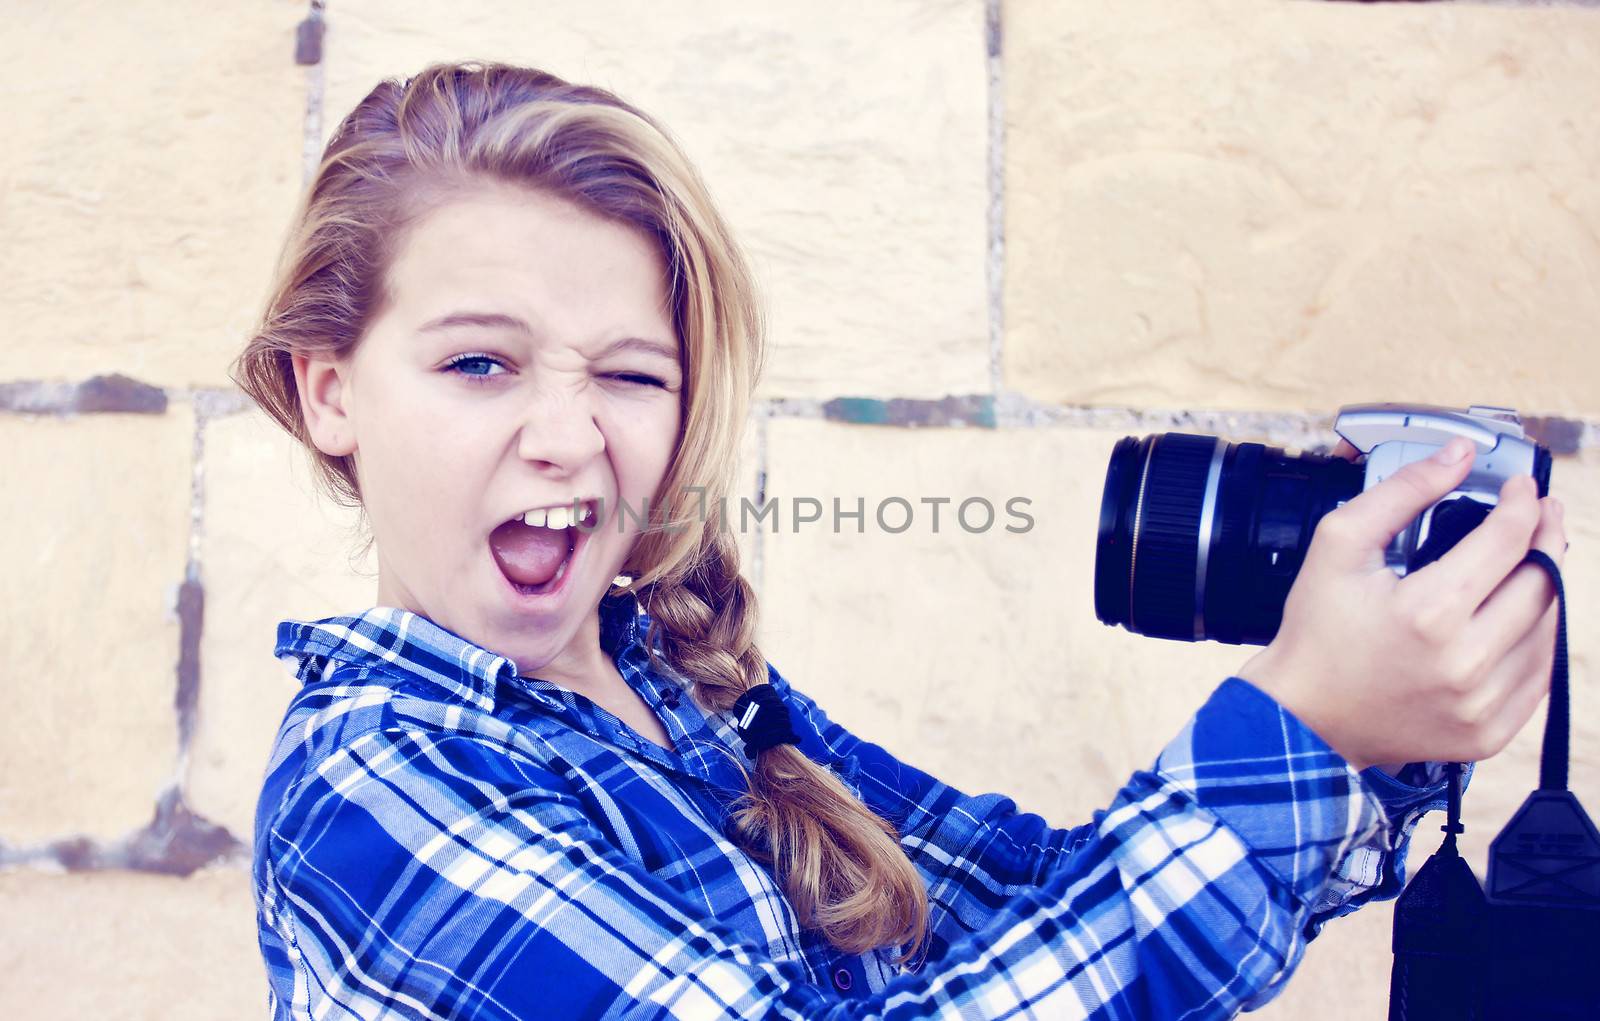 Young teenage girl doing a funny face taking a self portrait with a slr camera. Slight retro tint over image